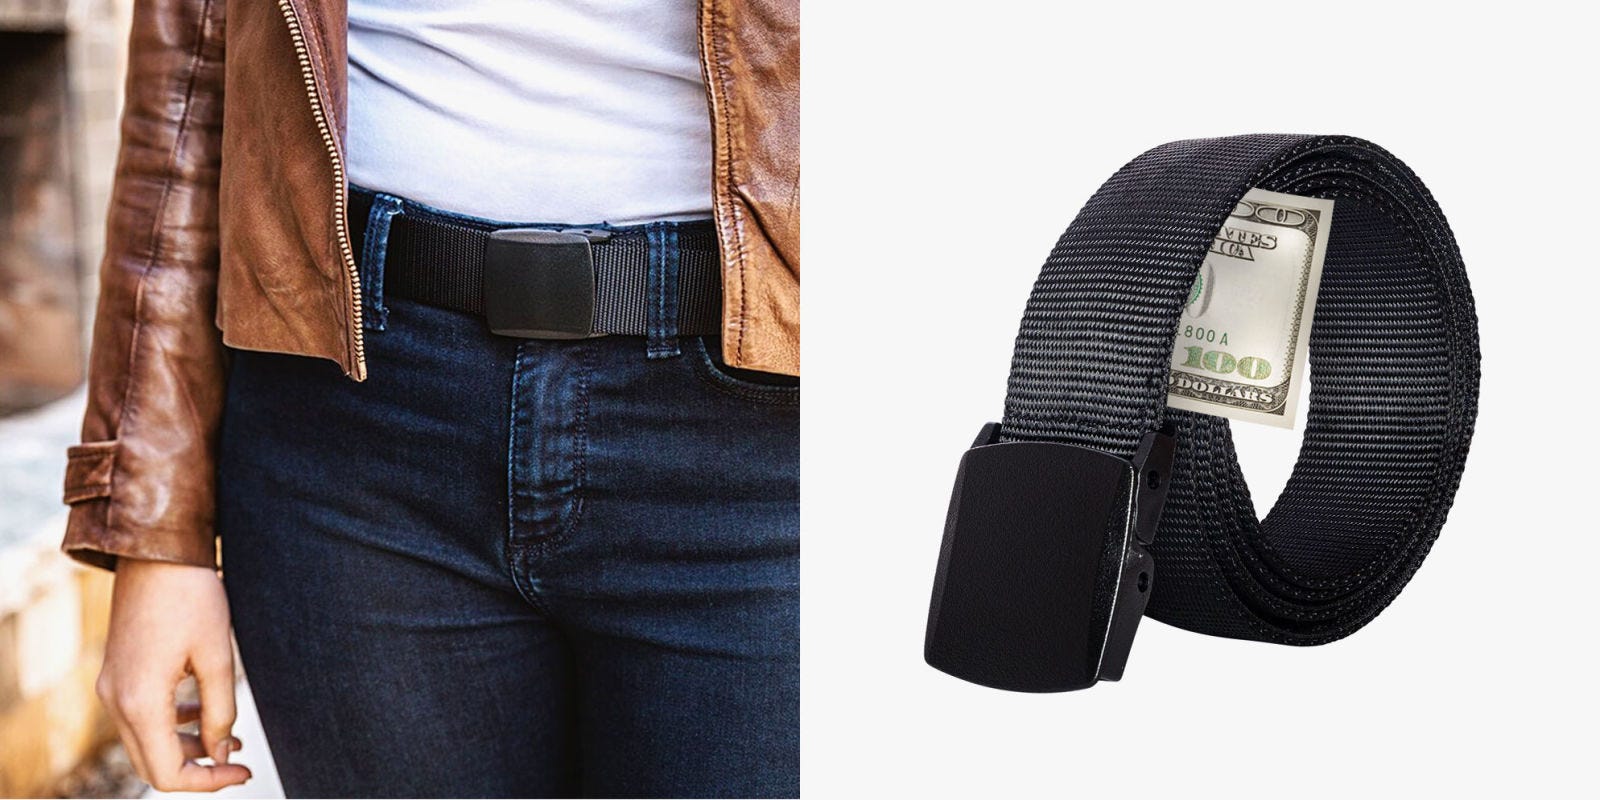 6 Best Travel Money Belts to Keep Your Documents Safe in 2018 - Money